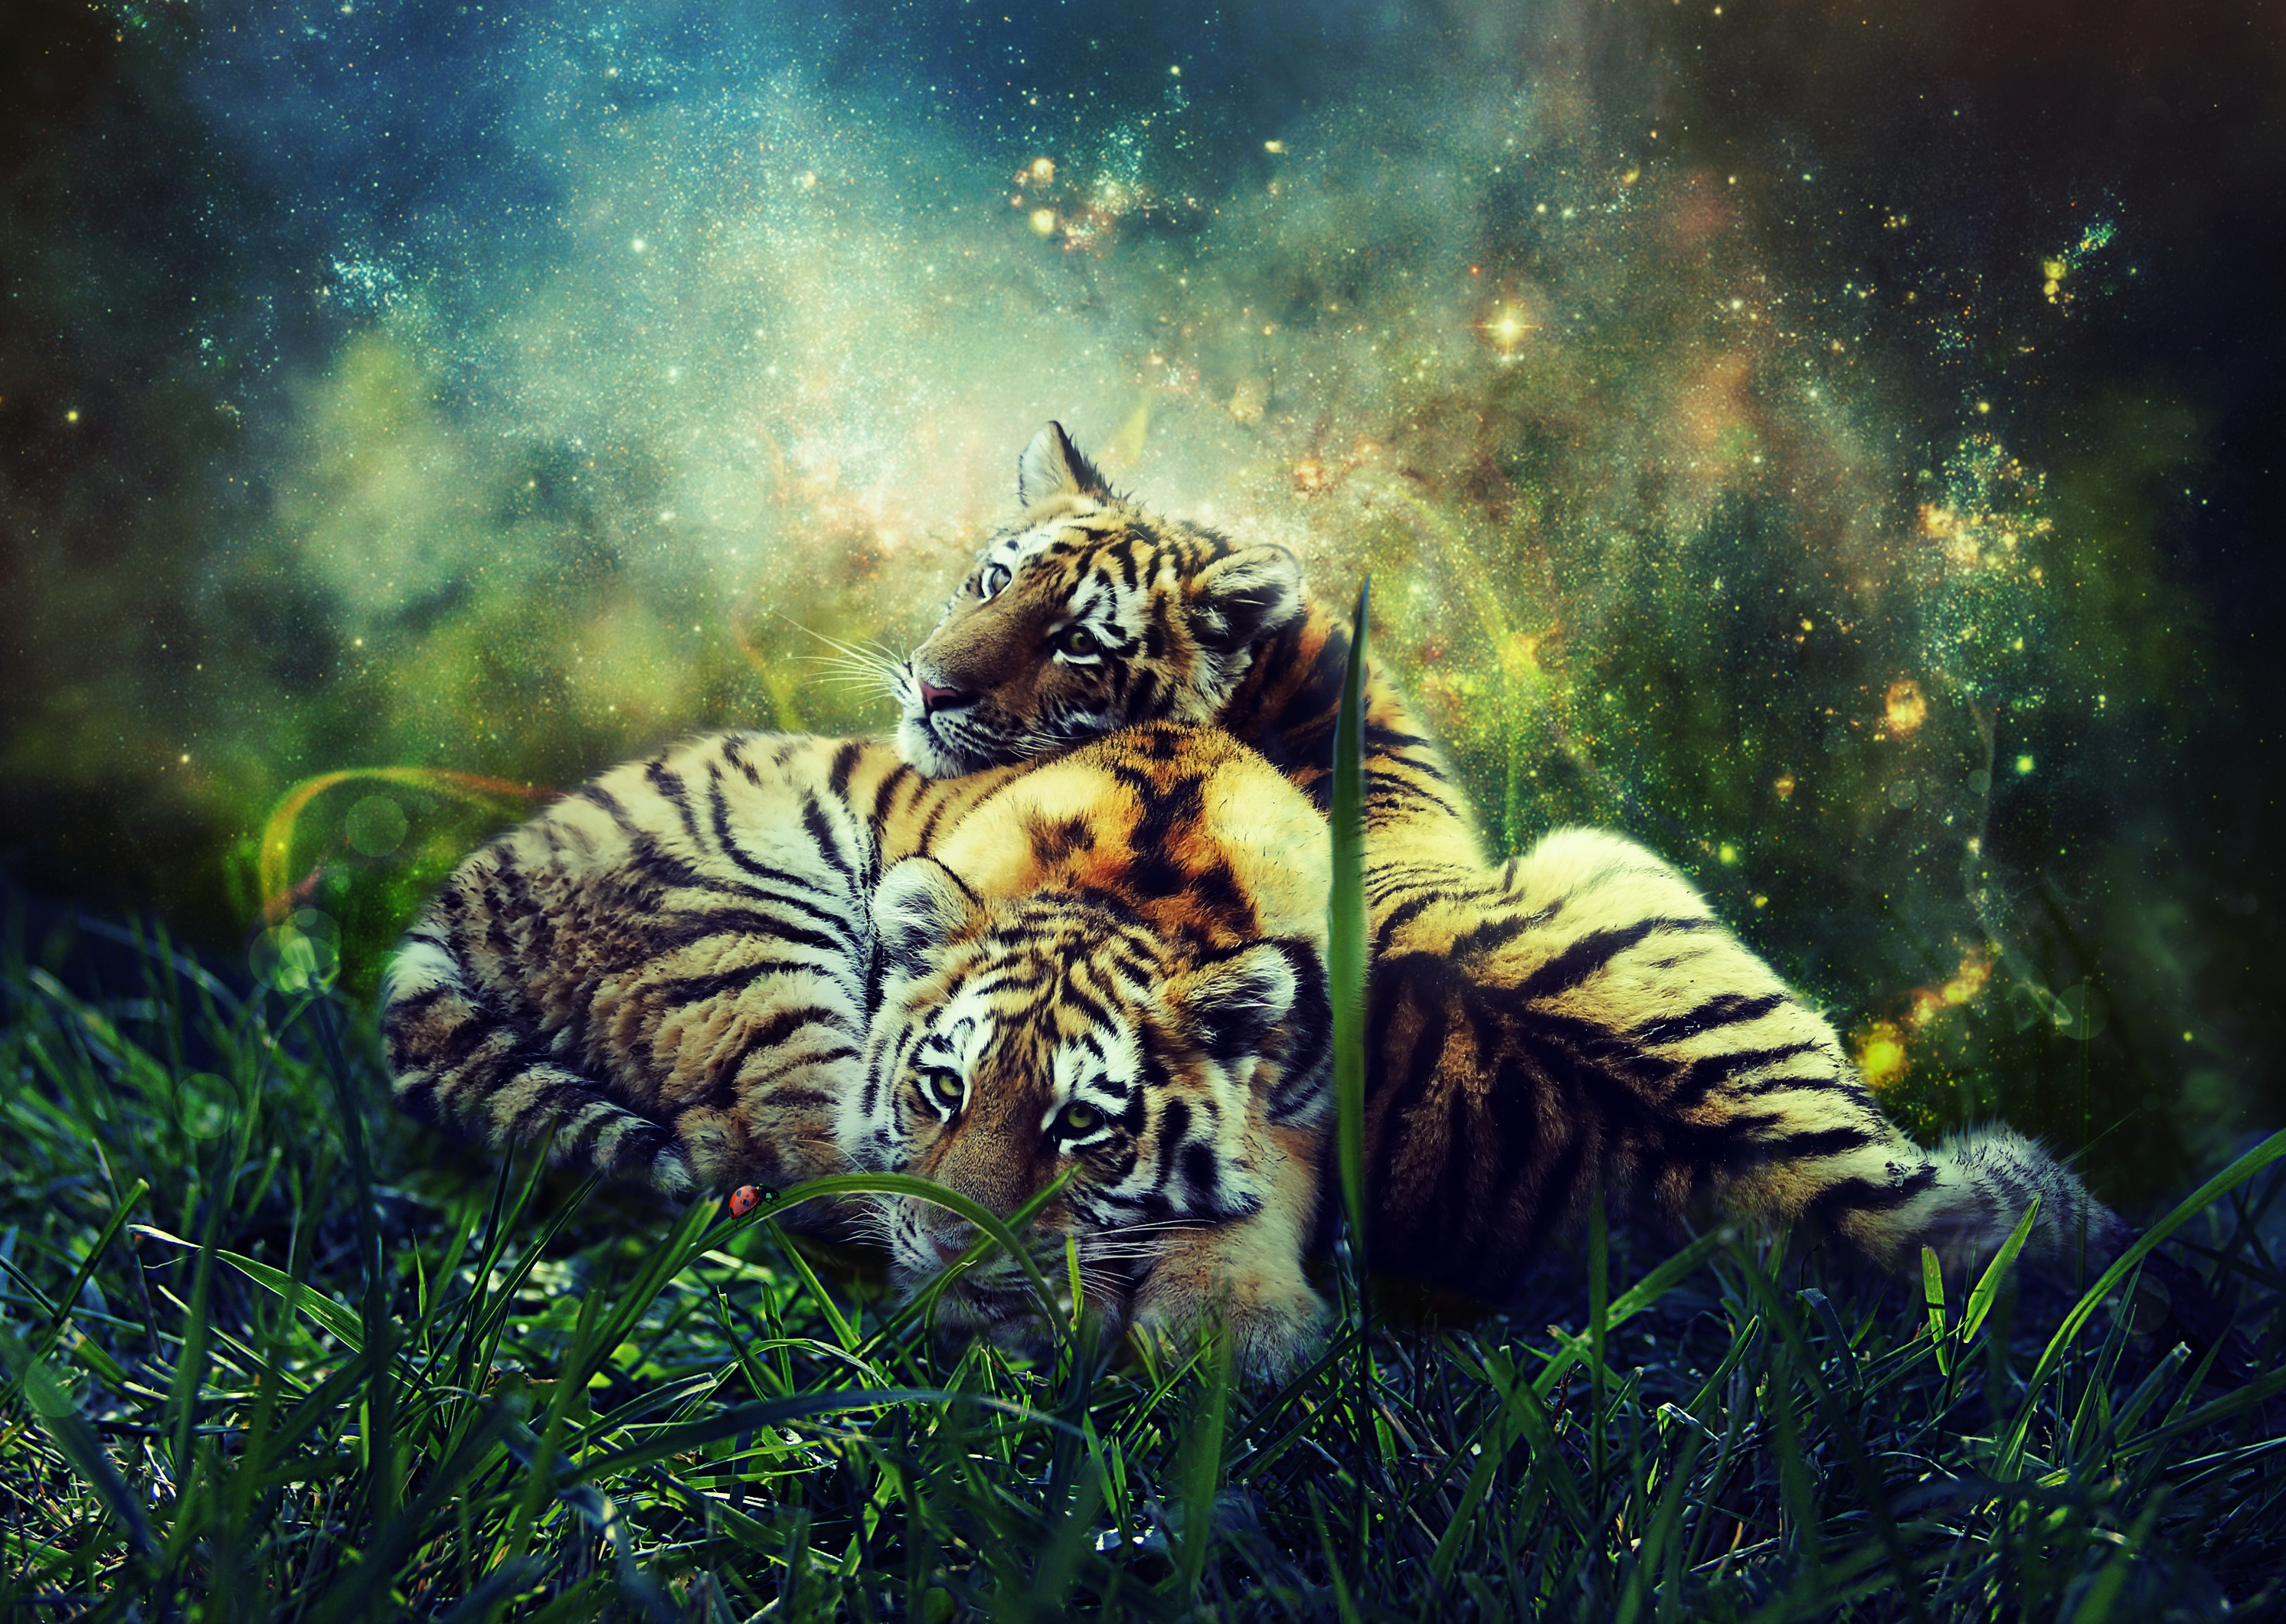 animals, tigers, young, wildlife, photoshop, cubs